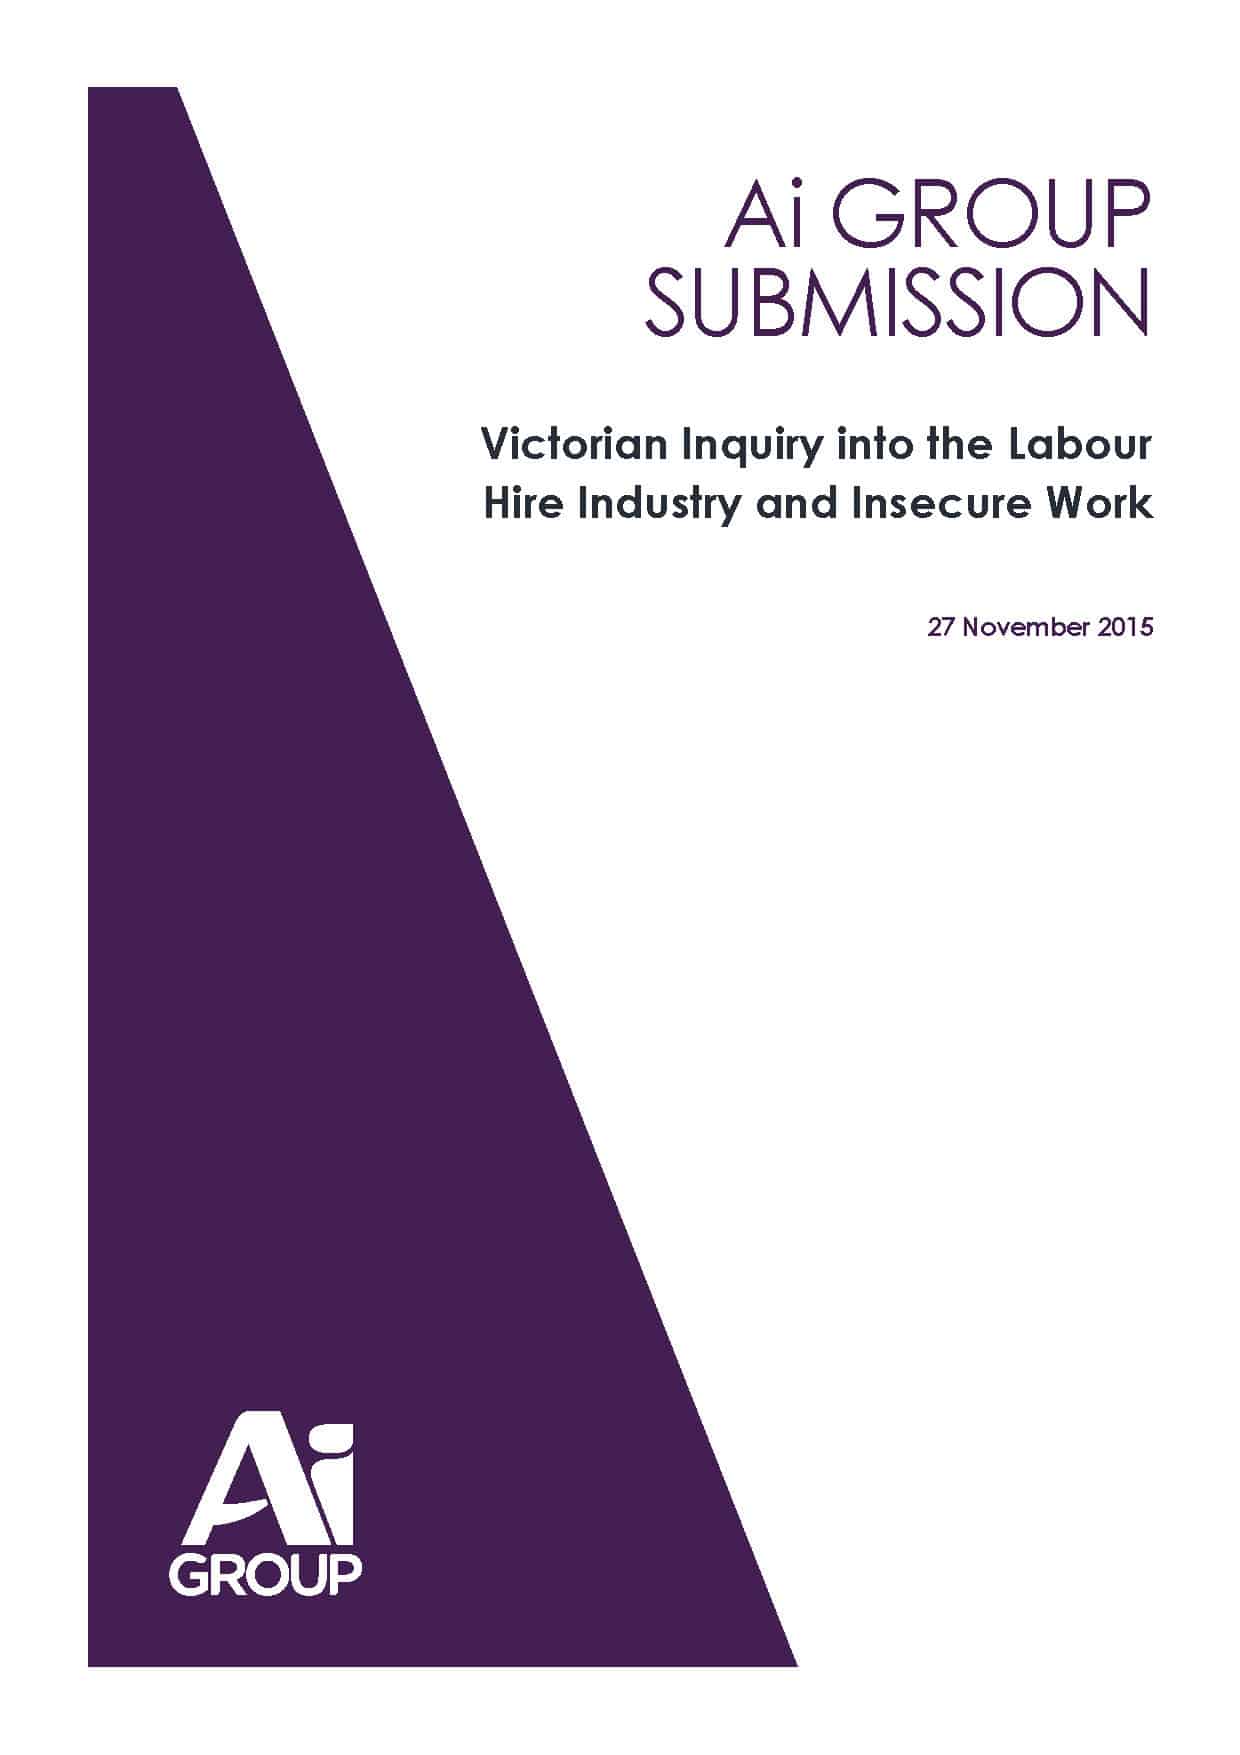 cover of Ai_Group_LabourHireandInsecureWork__November 2015_Final2